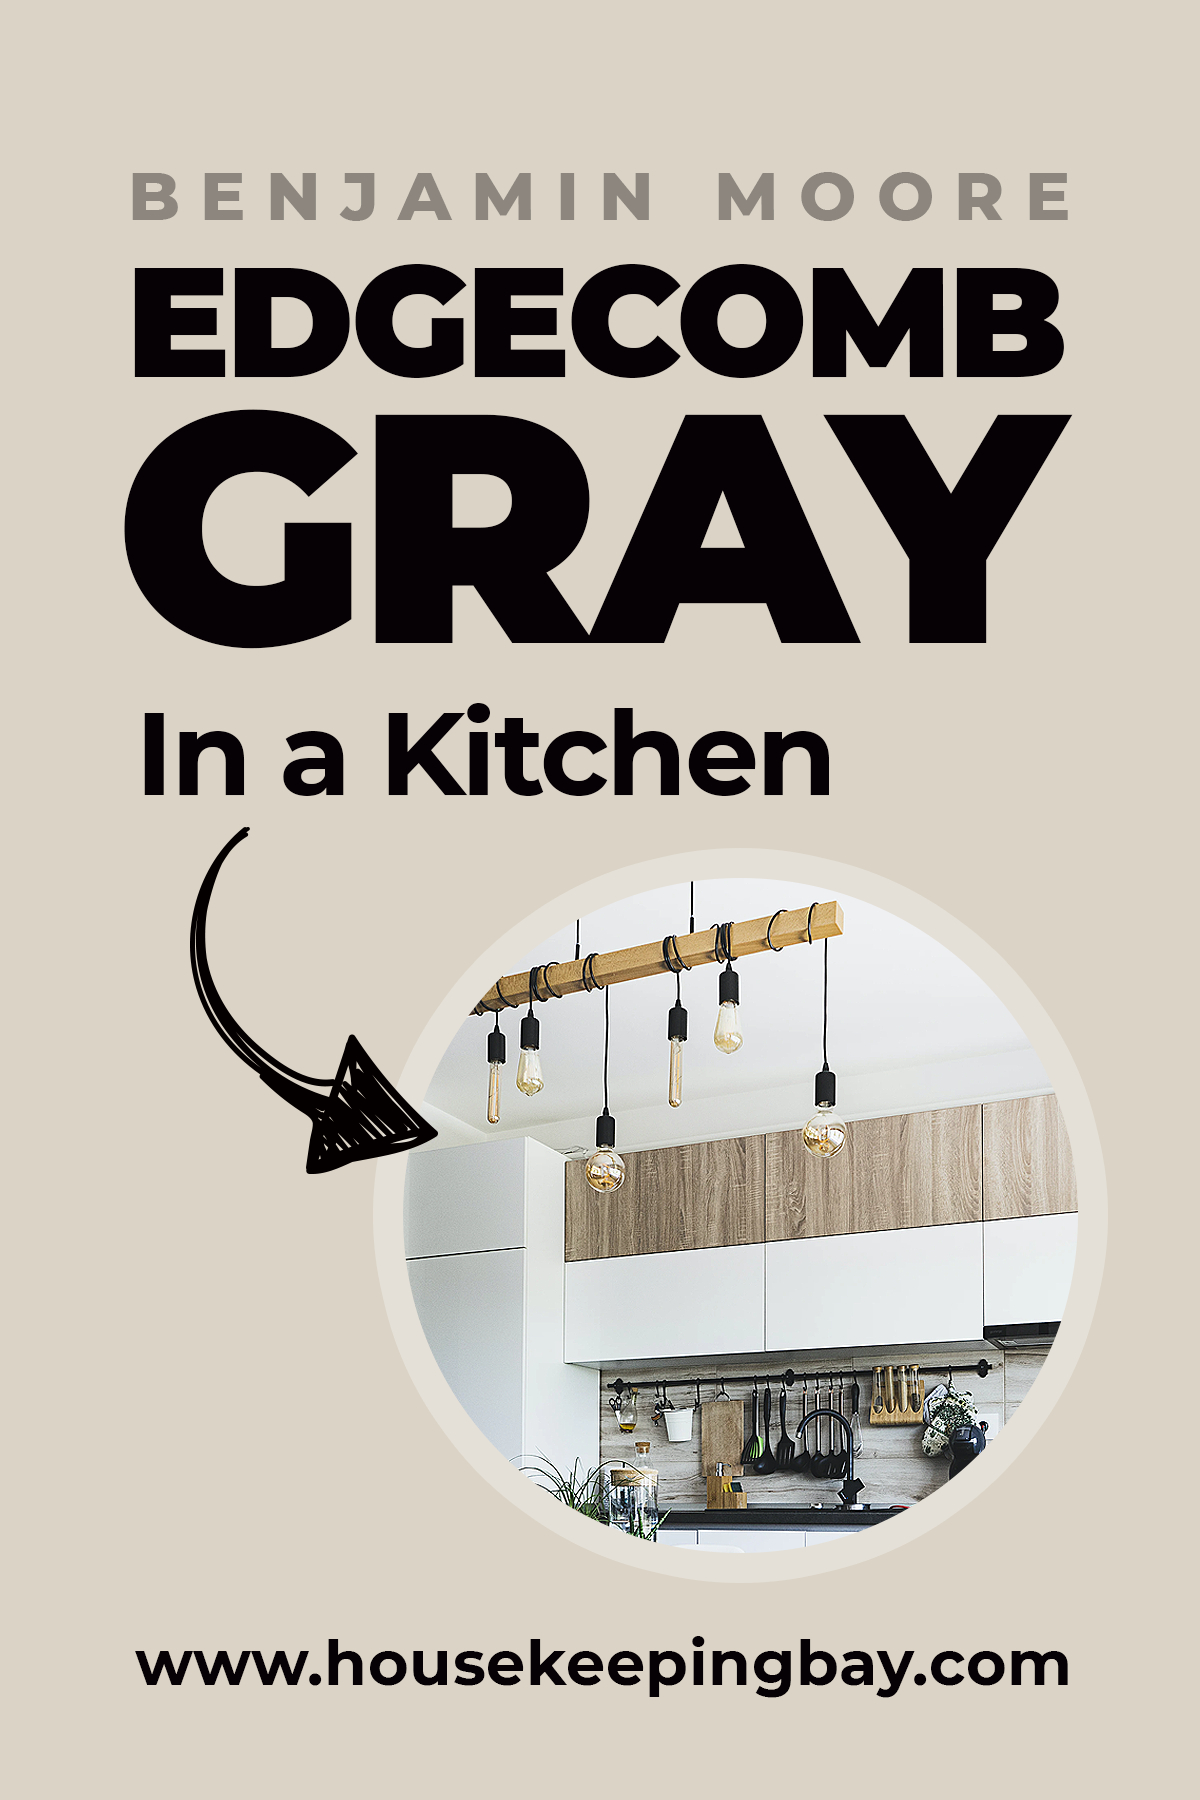 Edgecomb Gray In a Kitchen